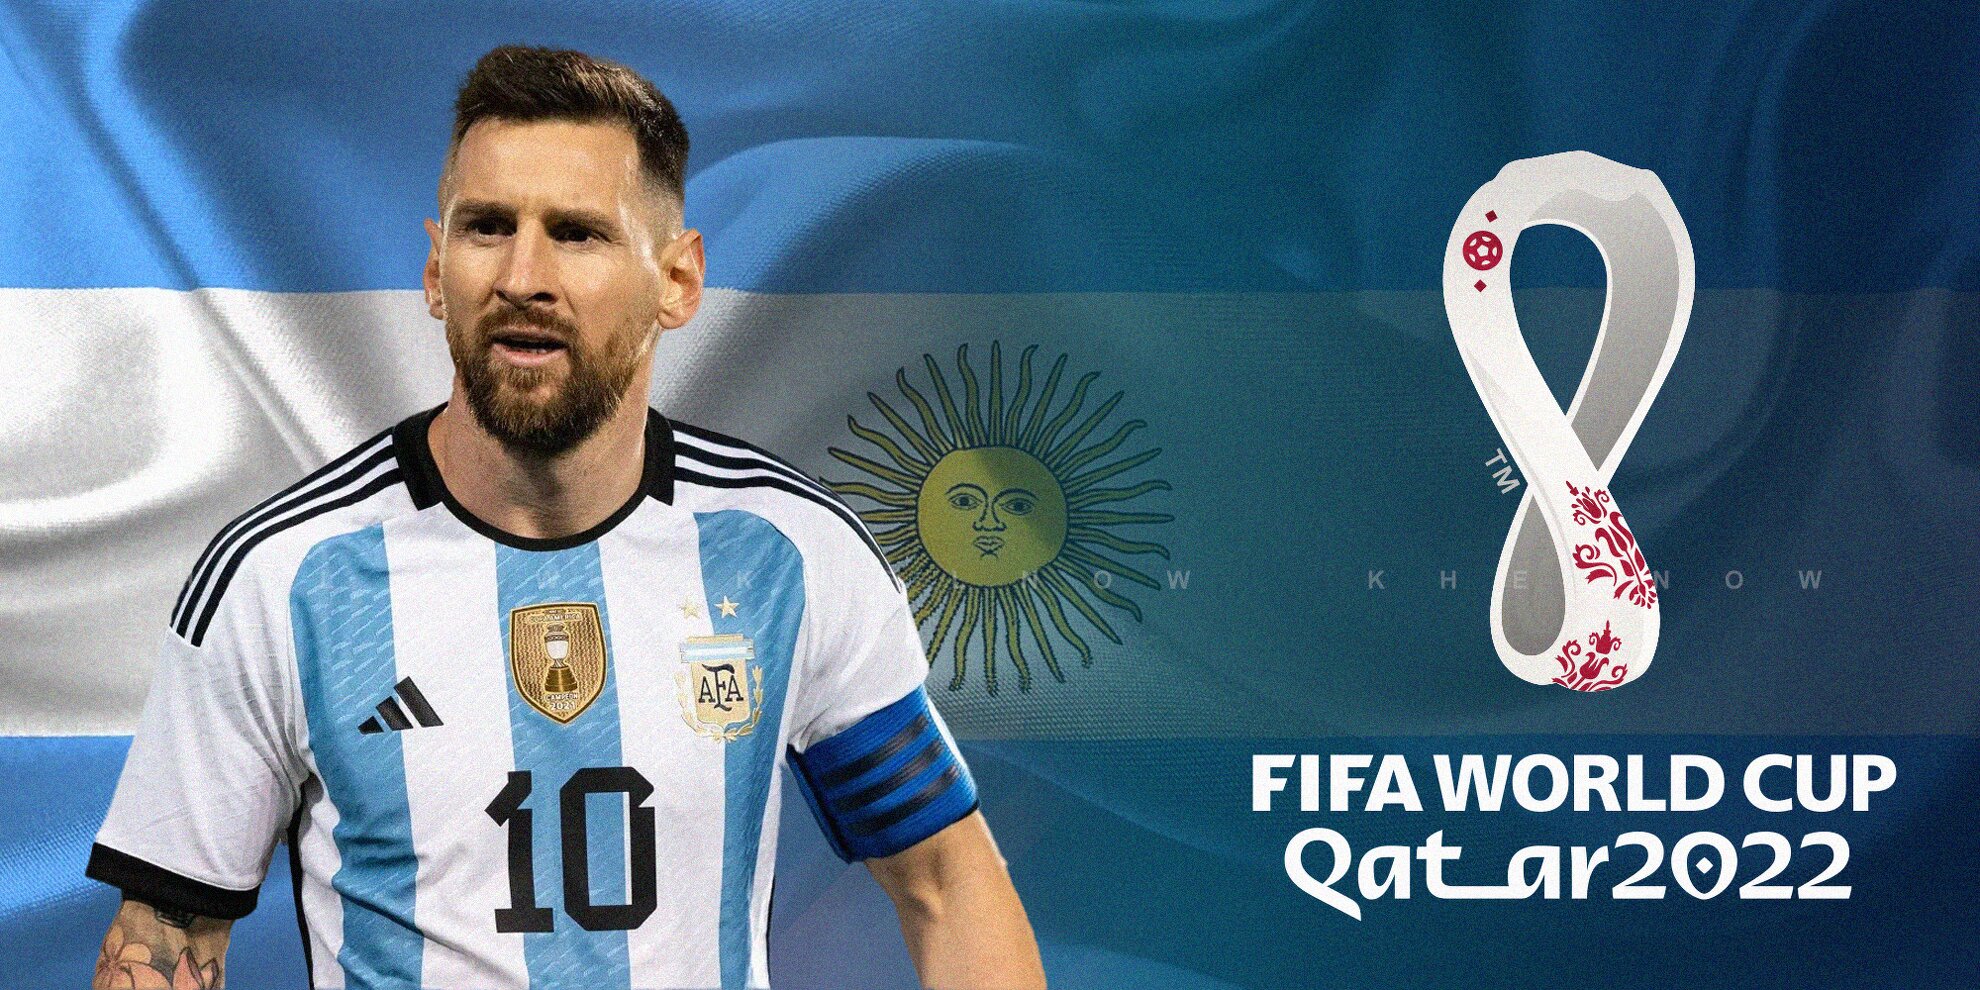 Have Argentina qualified for the knockout round of FIFA World Cup 2022?